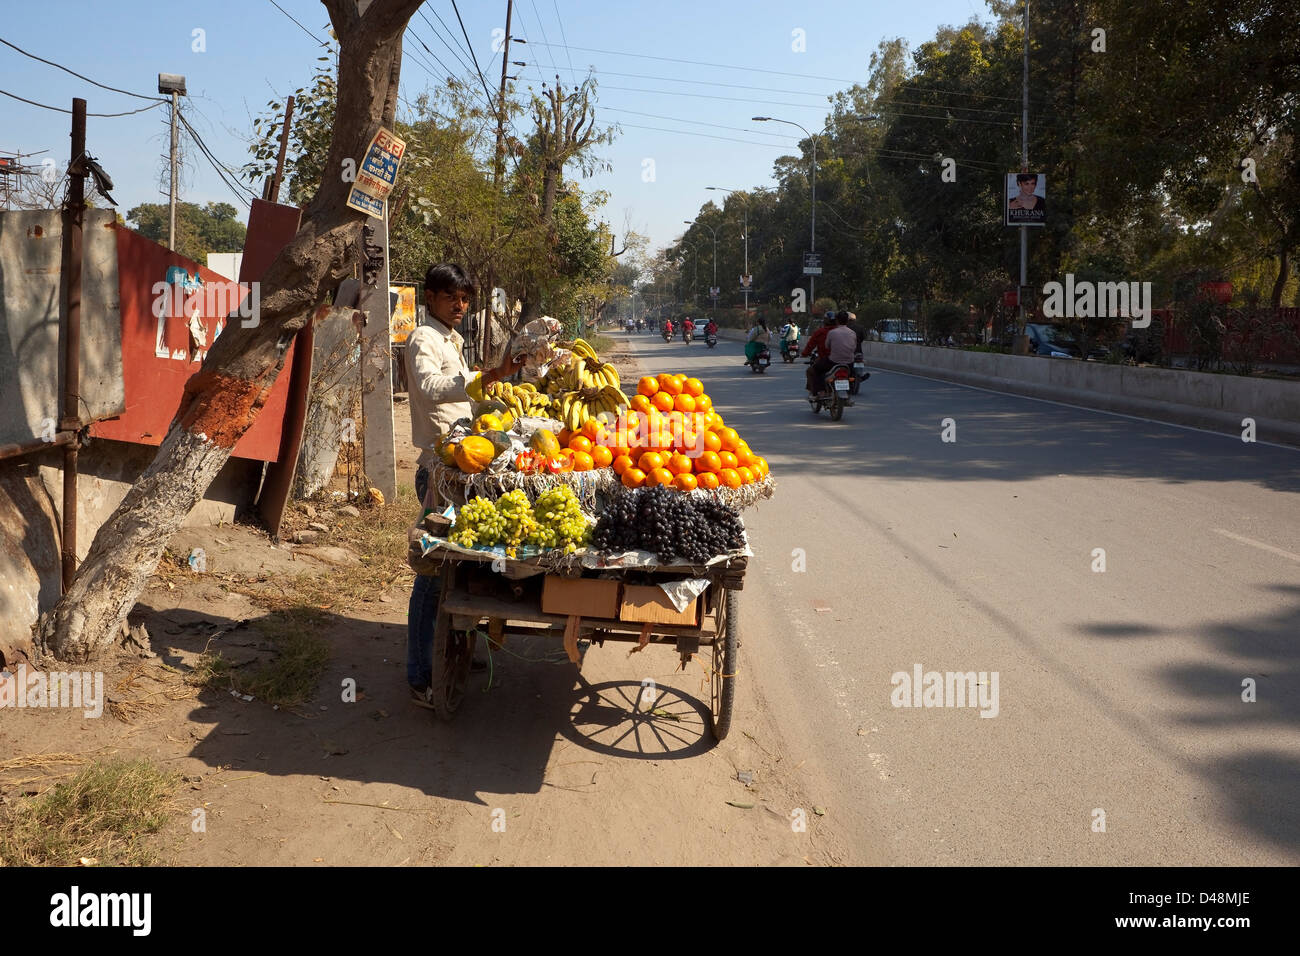 A roadside fruit vendor with grapes oranges and bananas in Amritsar Punjab India Stock Photo